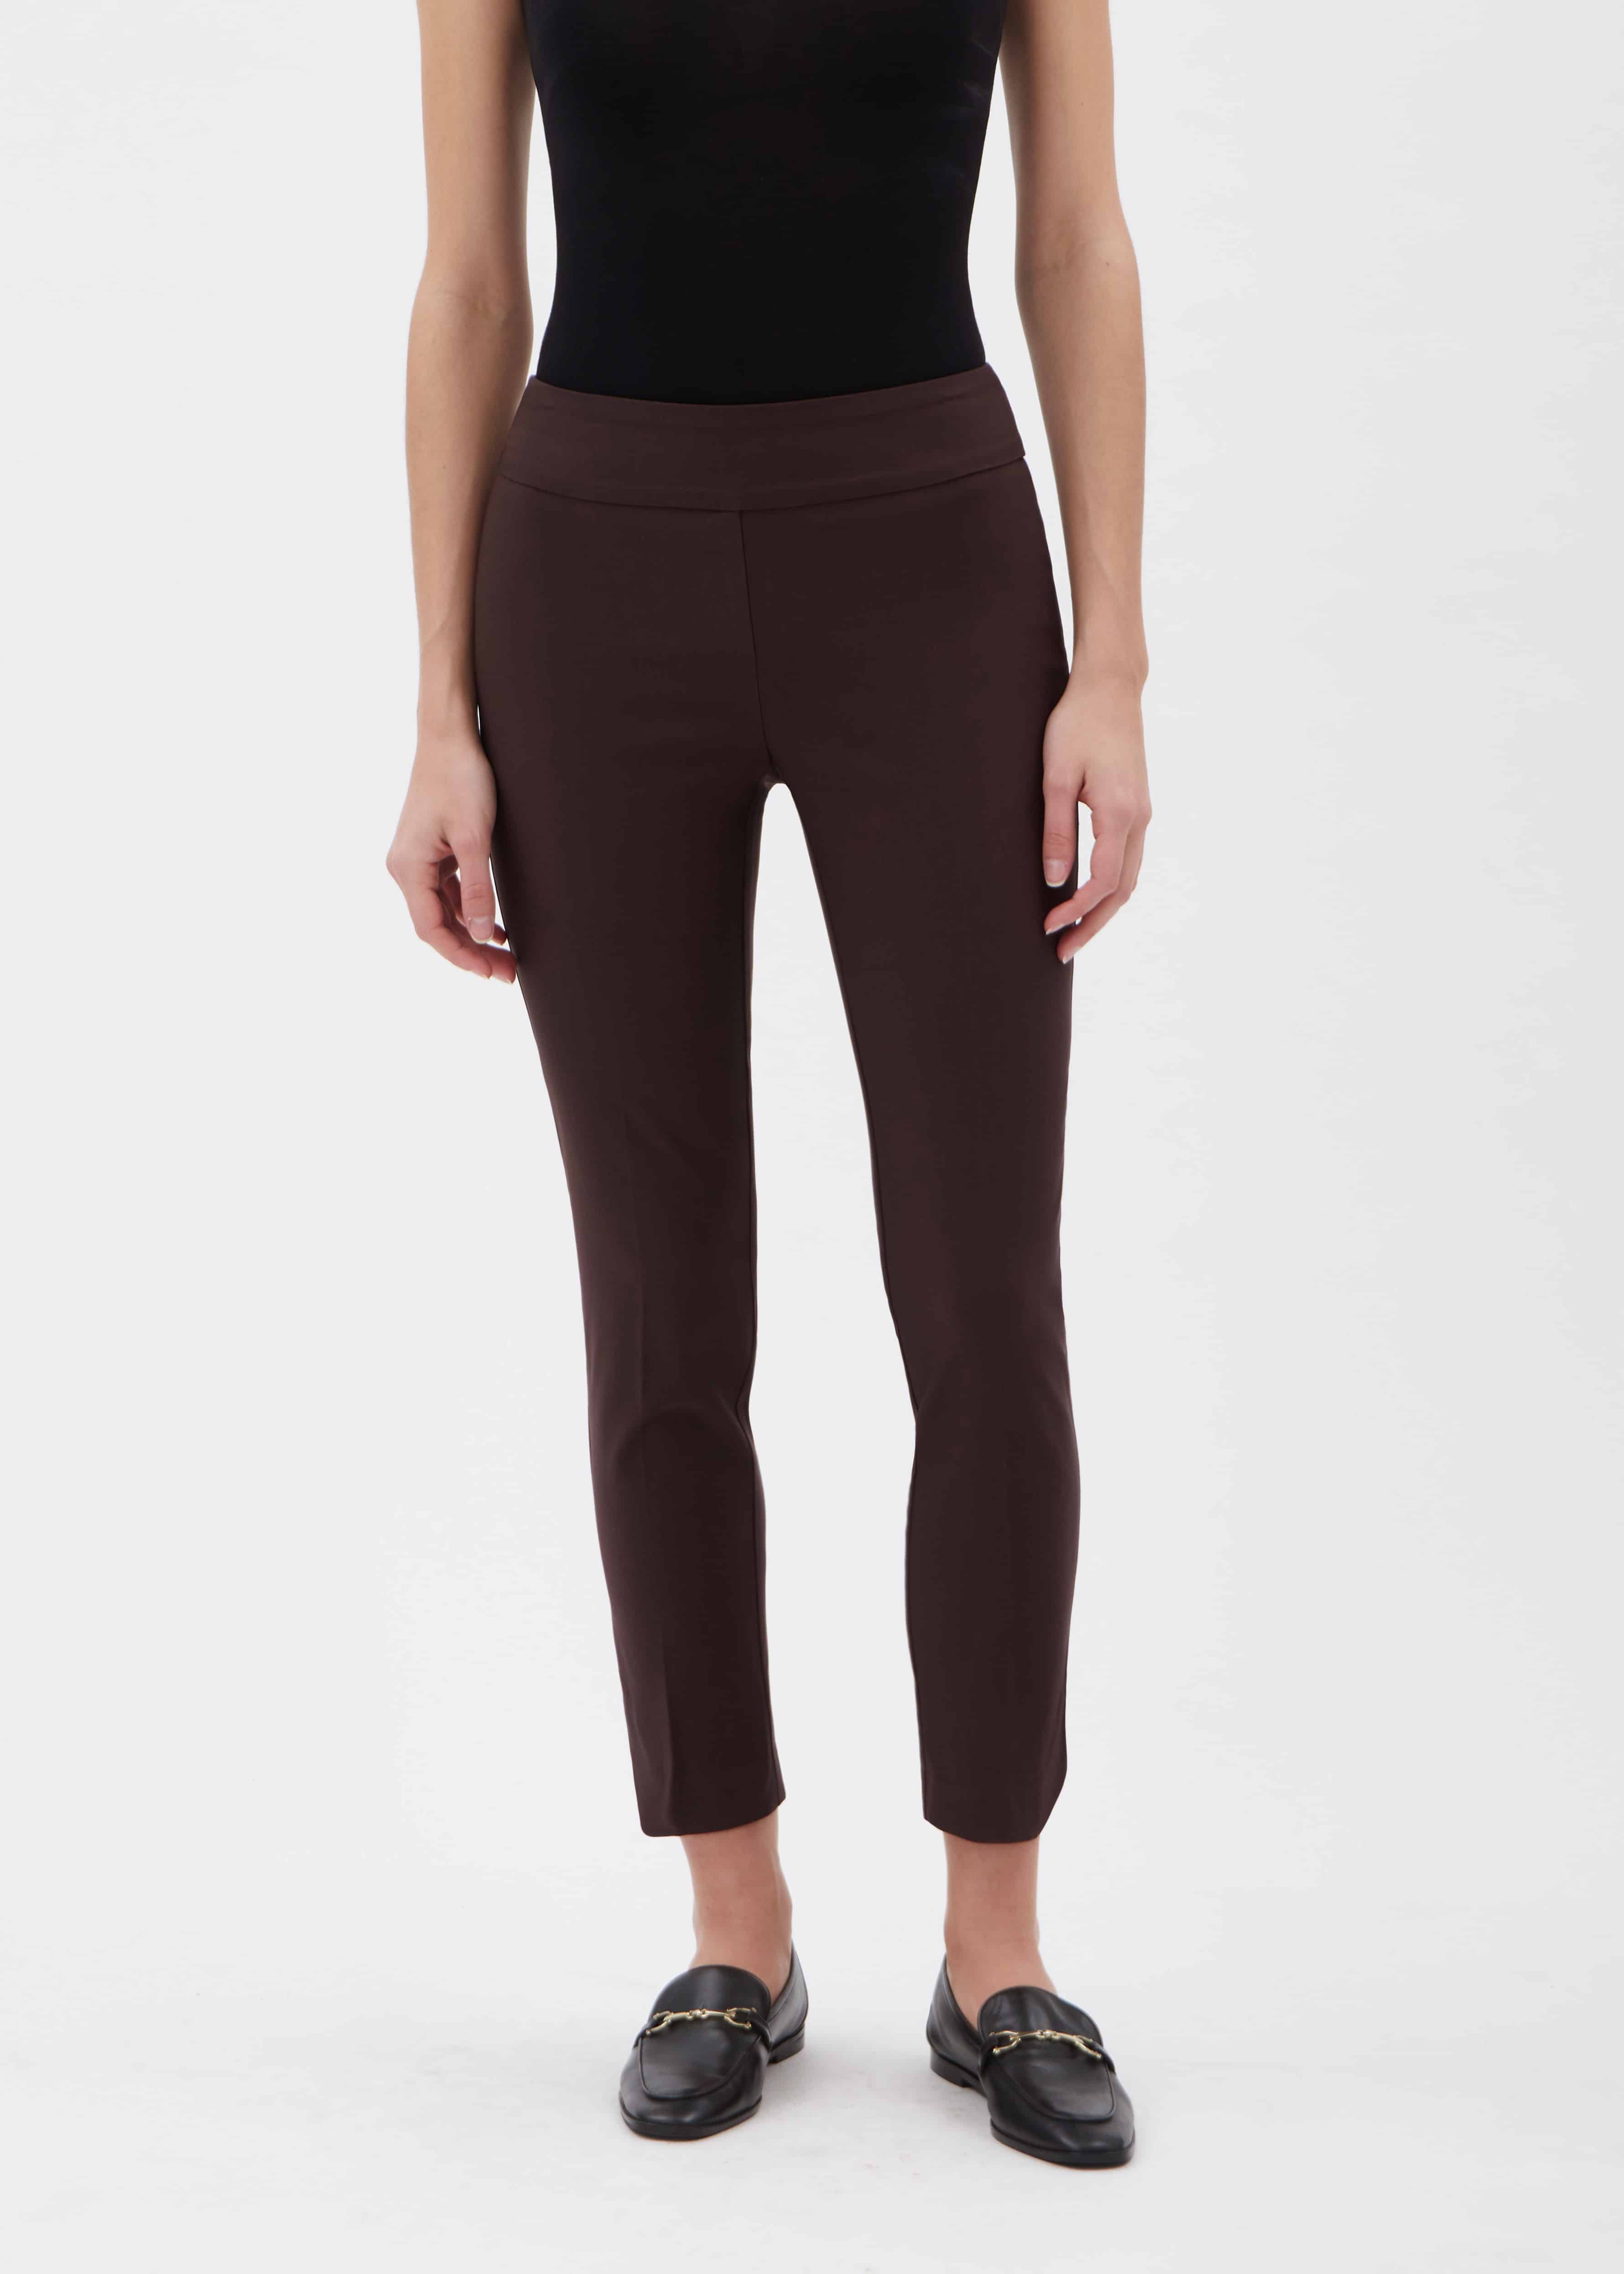 Preview Slim Ankle Pants